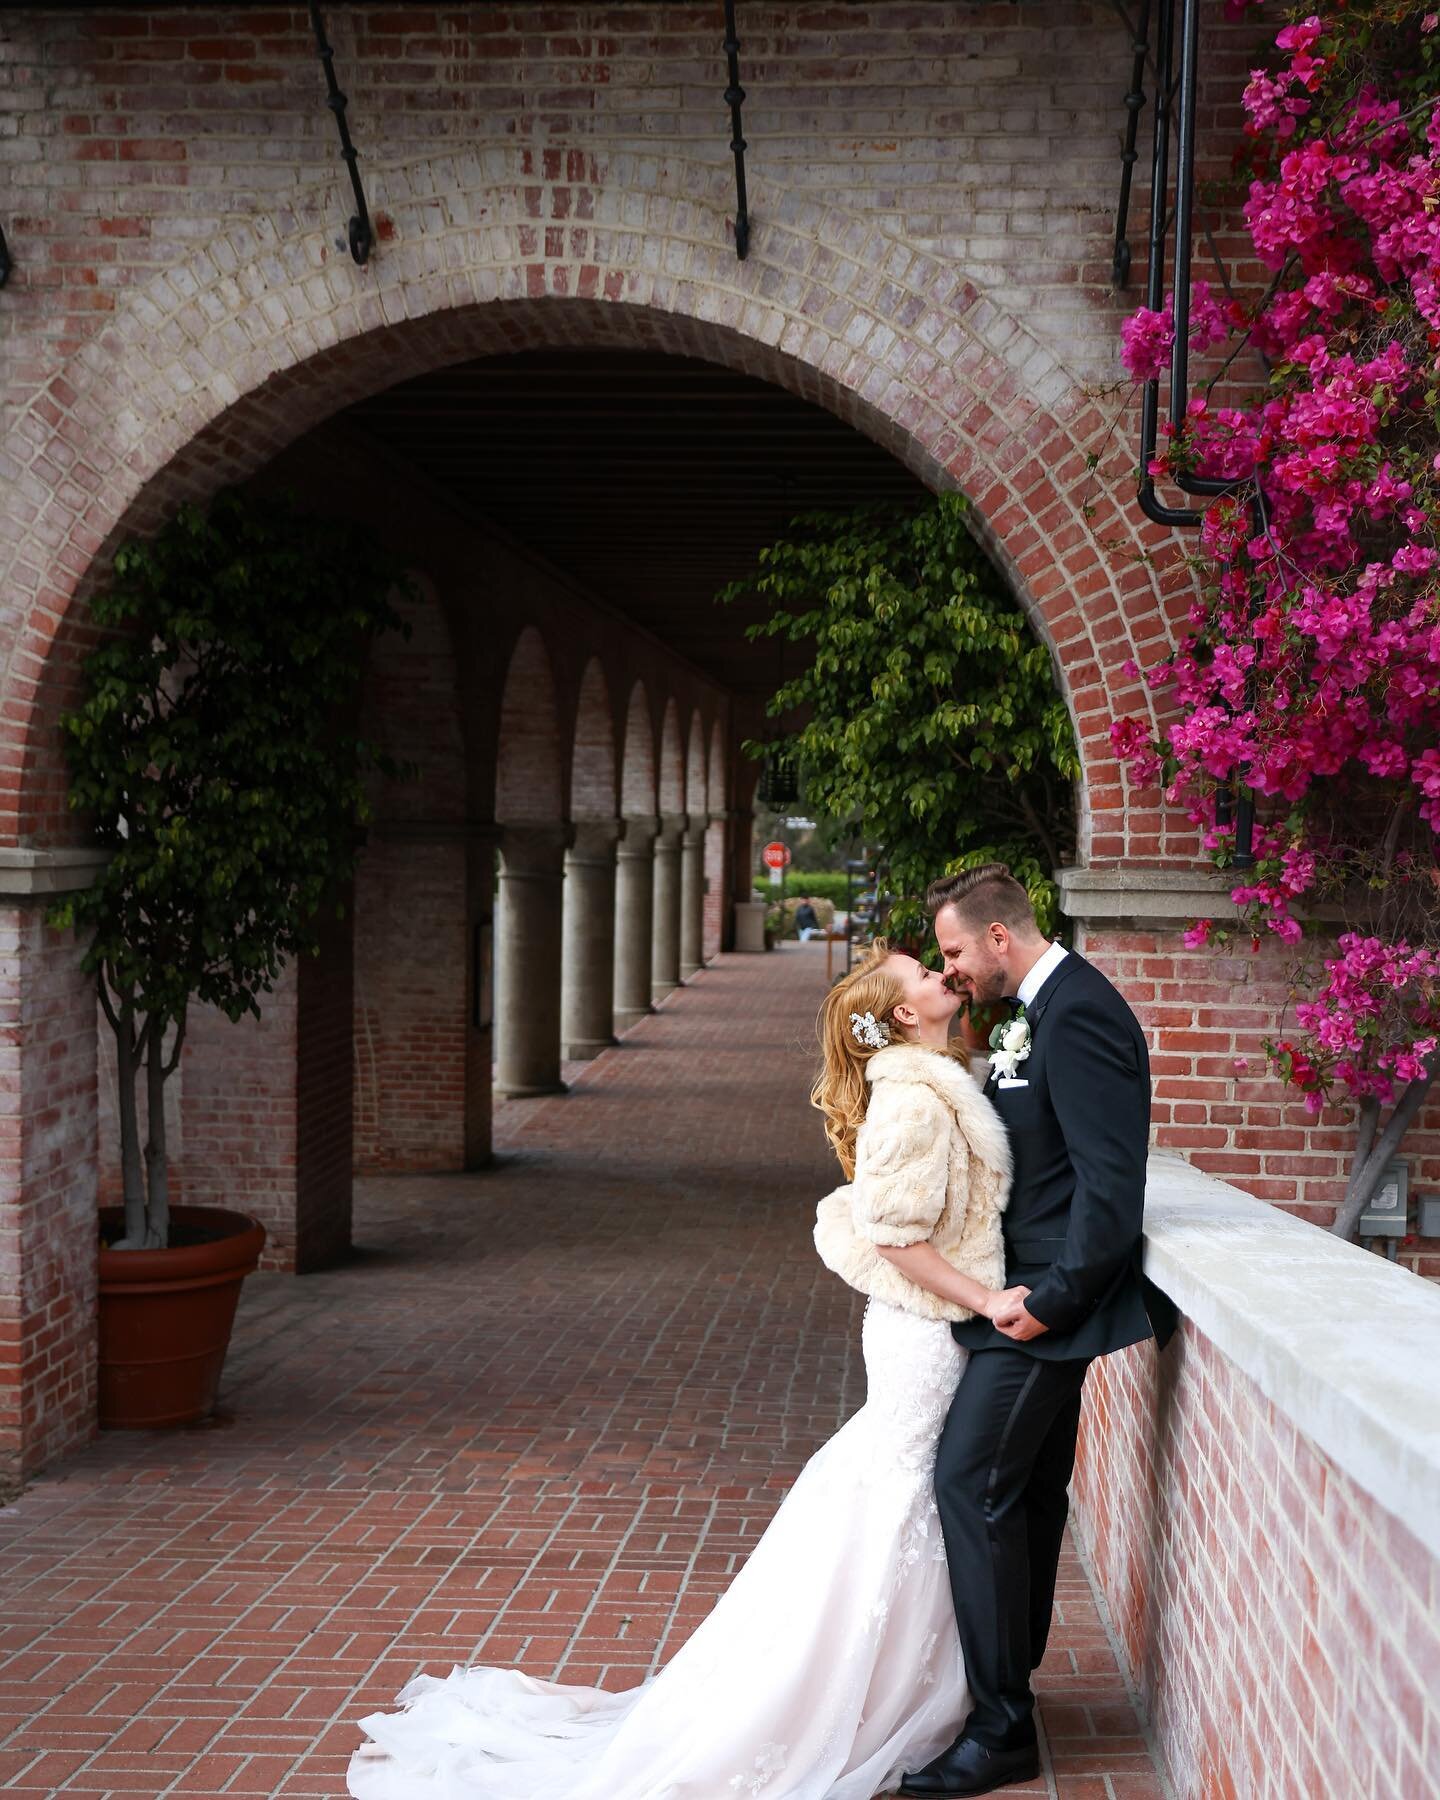 Amore in Cali: Capturing their Italian-inspired love story in Southern California. Forever starts here. ❤️🇮🇹 #socalwedding #weddingdestinationphotographer